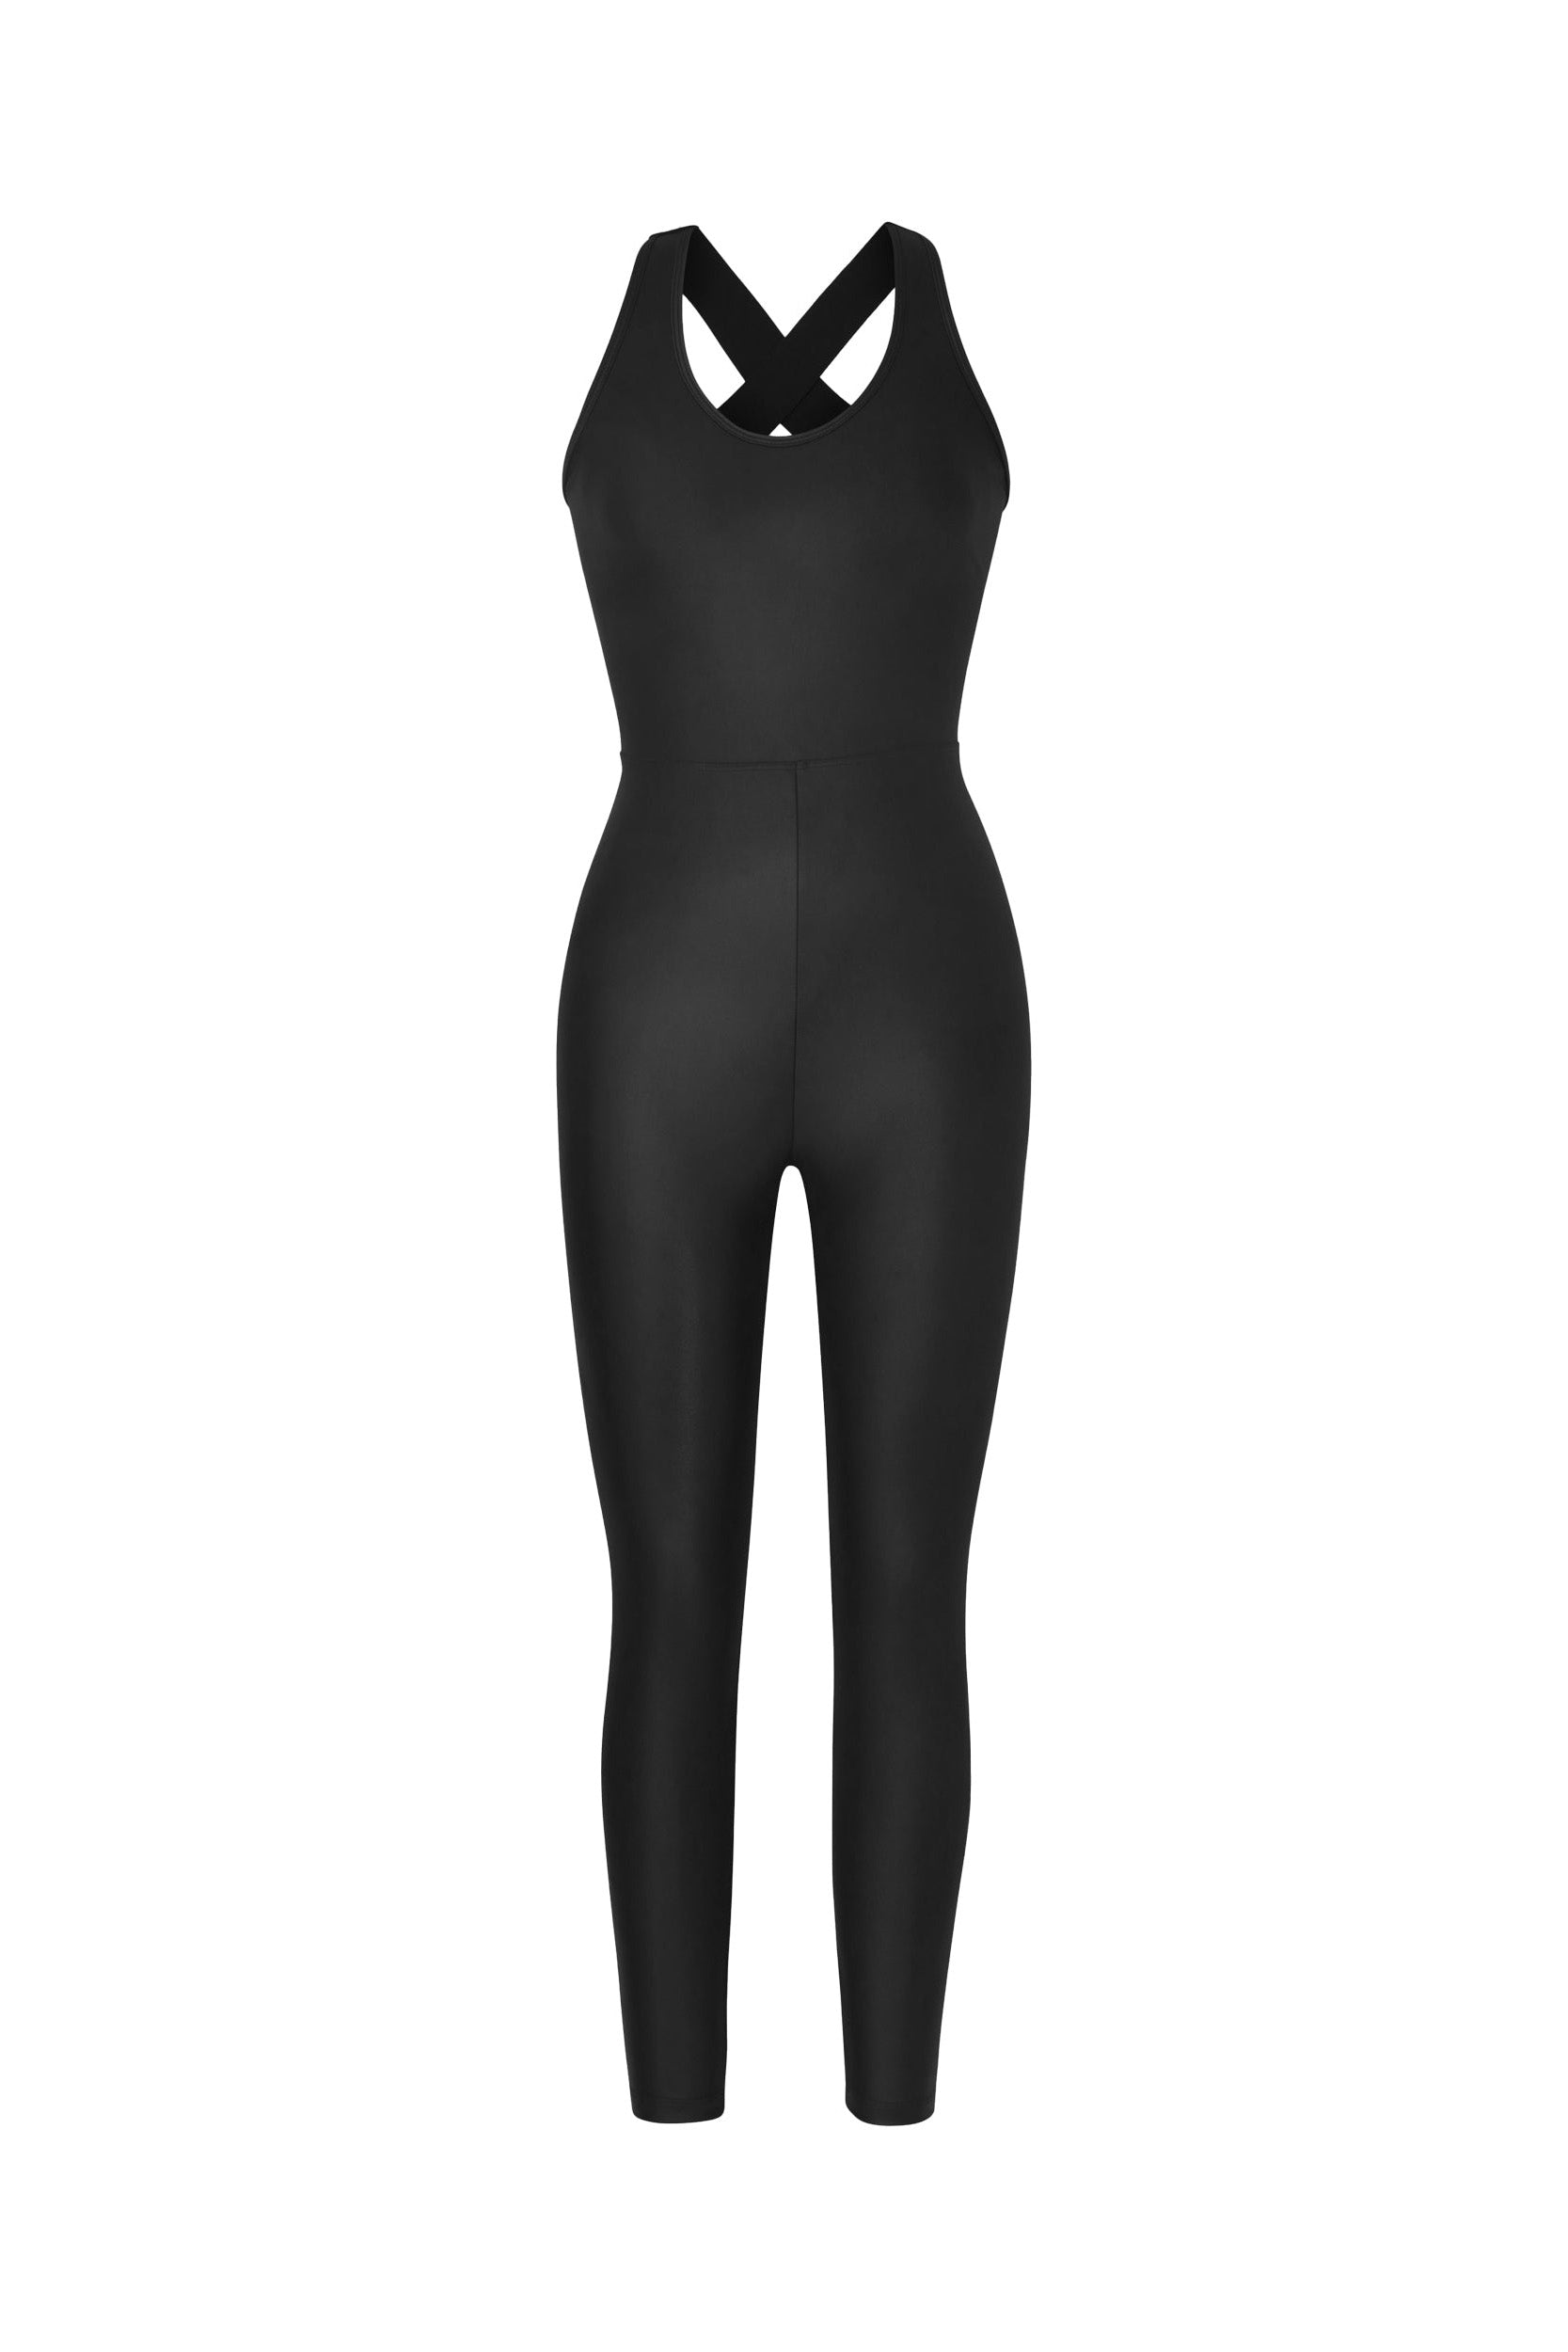 Introducing the Liquid Vixen Jumpsuit - Black Gloss: a form-fitting sleeveless jumpsuit with crisscross straps at the back. This versatile unitard features a high waist and long, tapered pant legs for a sleek and stylish look. The stretchy fabric enhances comfort, making it ideal for active or casual wear.